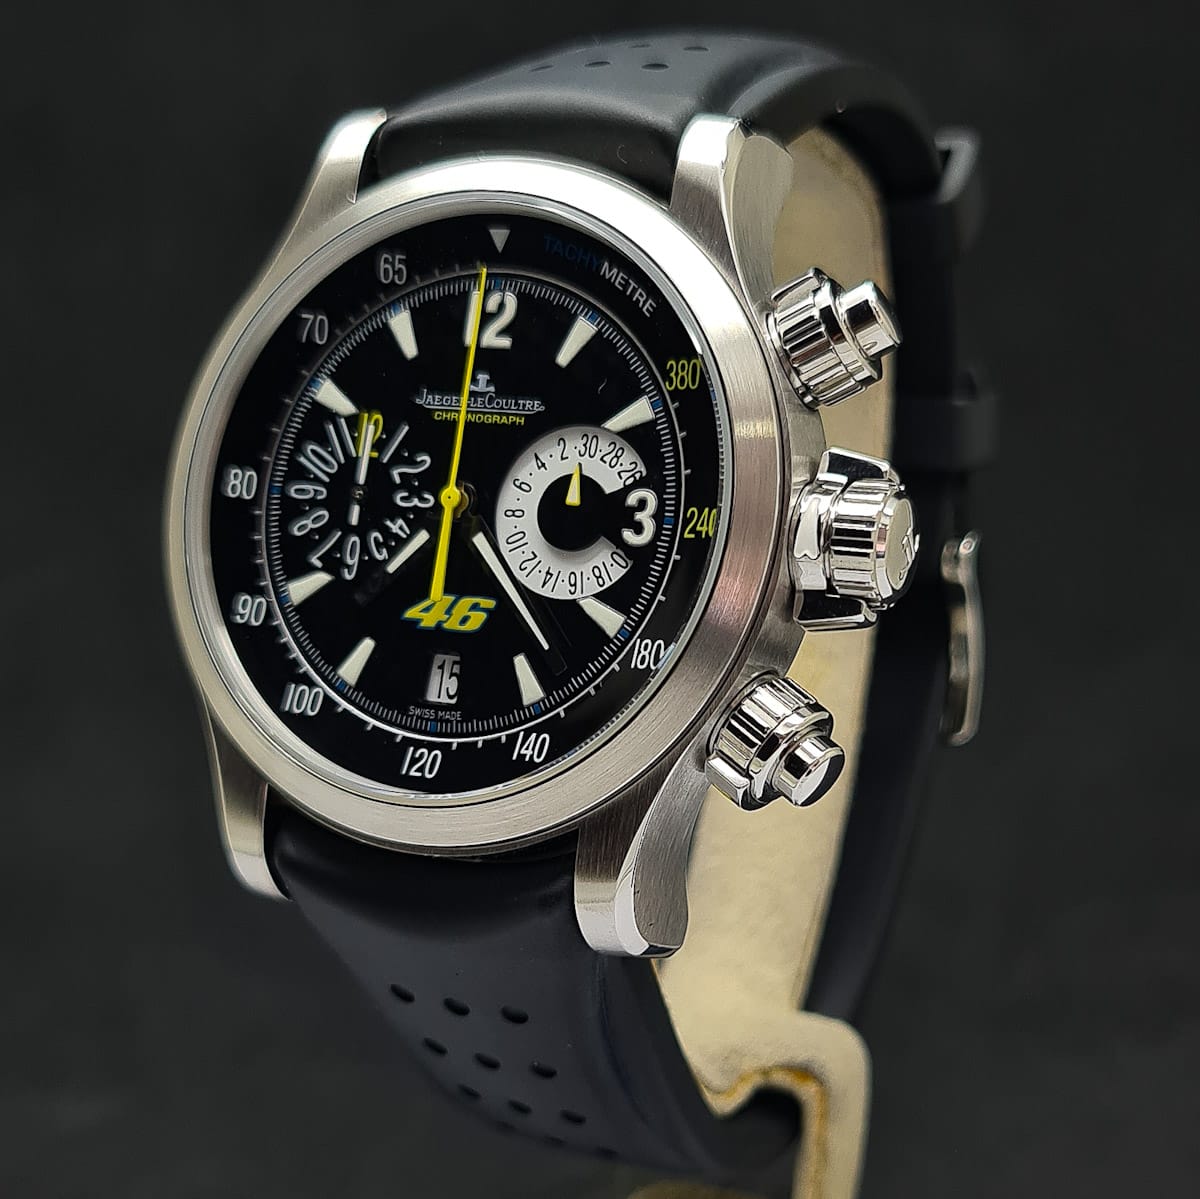 JAEGER-LECOULTRE MASTER COMPRESSOR CHRONOGRAPH - LIMITED